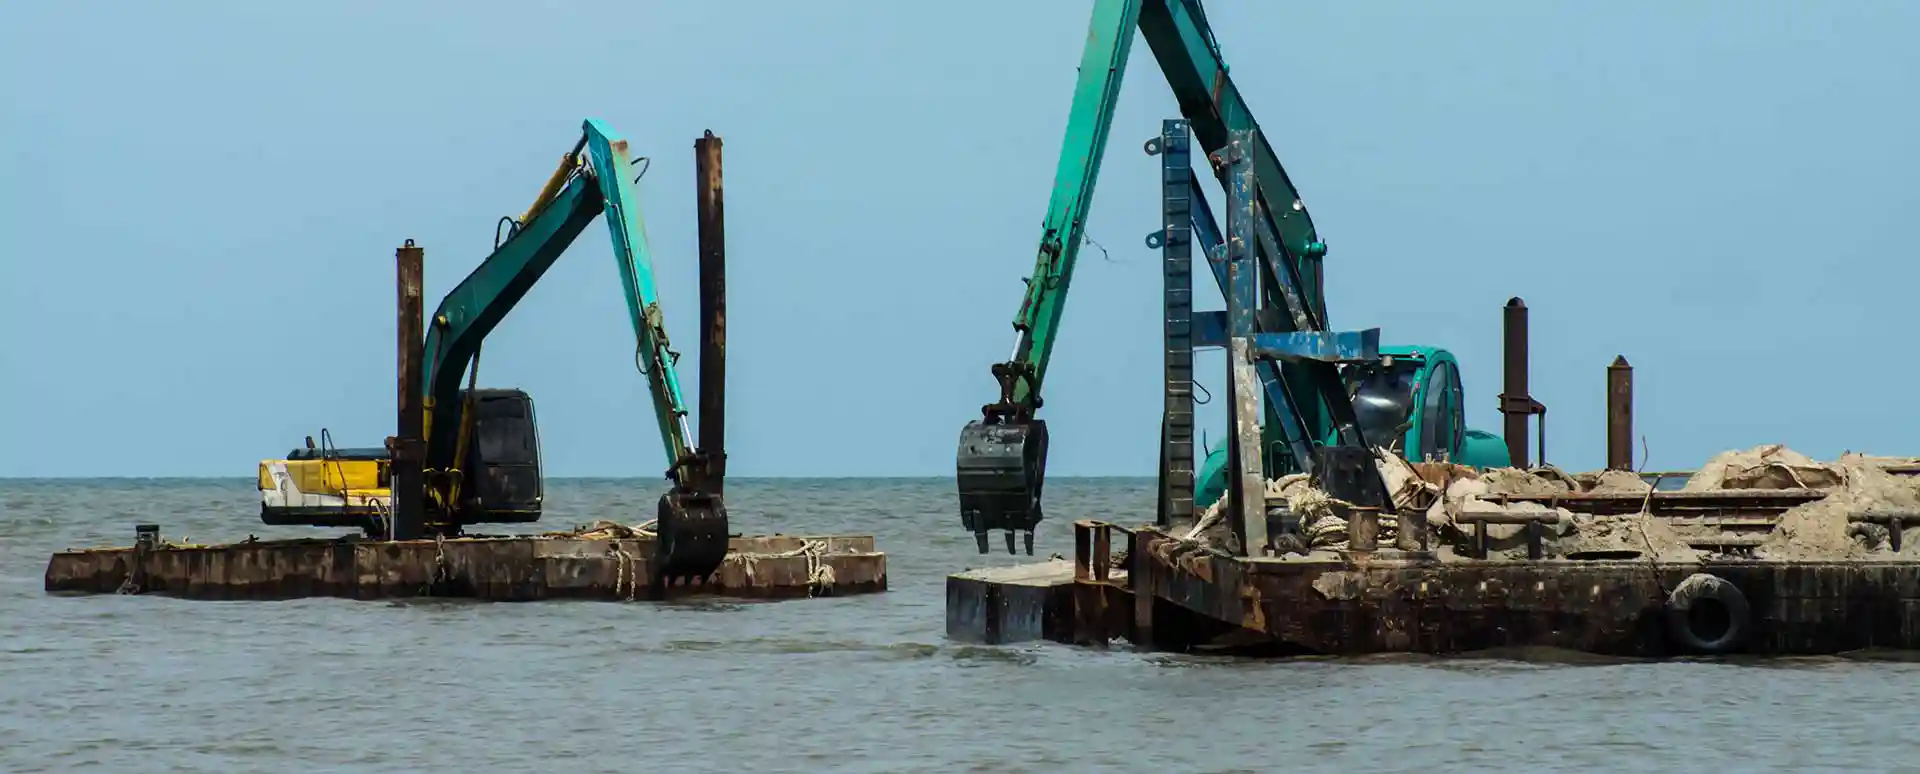 Two excavators in the water dredging contaminated soil